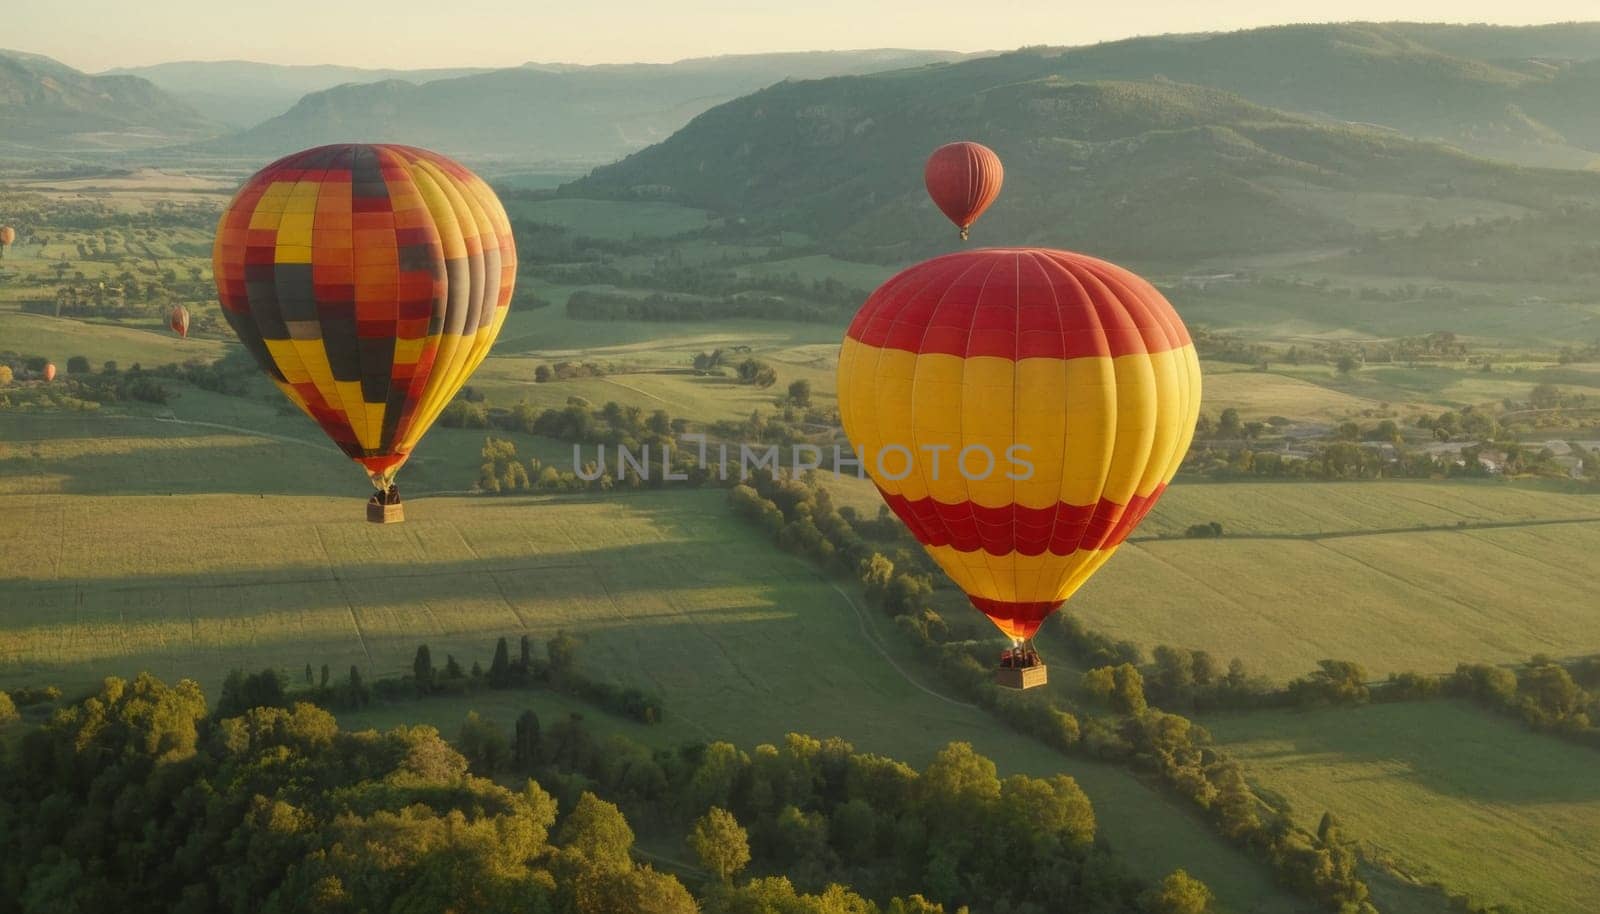 A breathtaking view of colorful hot air balloons soaring over a picturesque historic village nestled among lush greenery and mountains at sunrise.